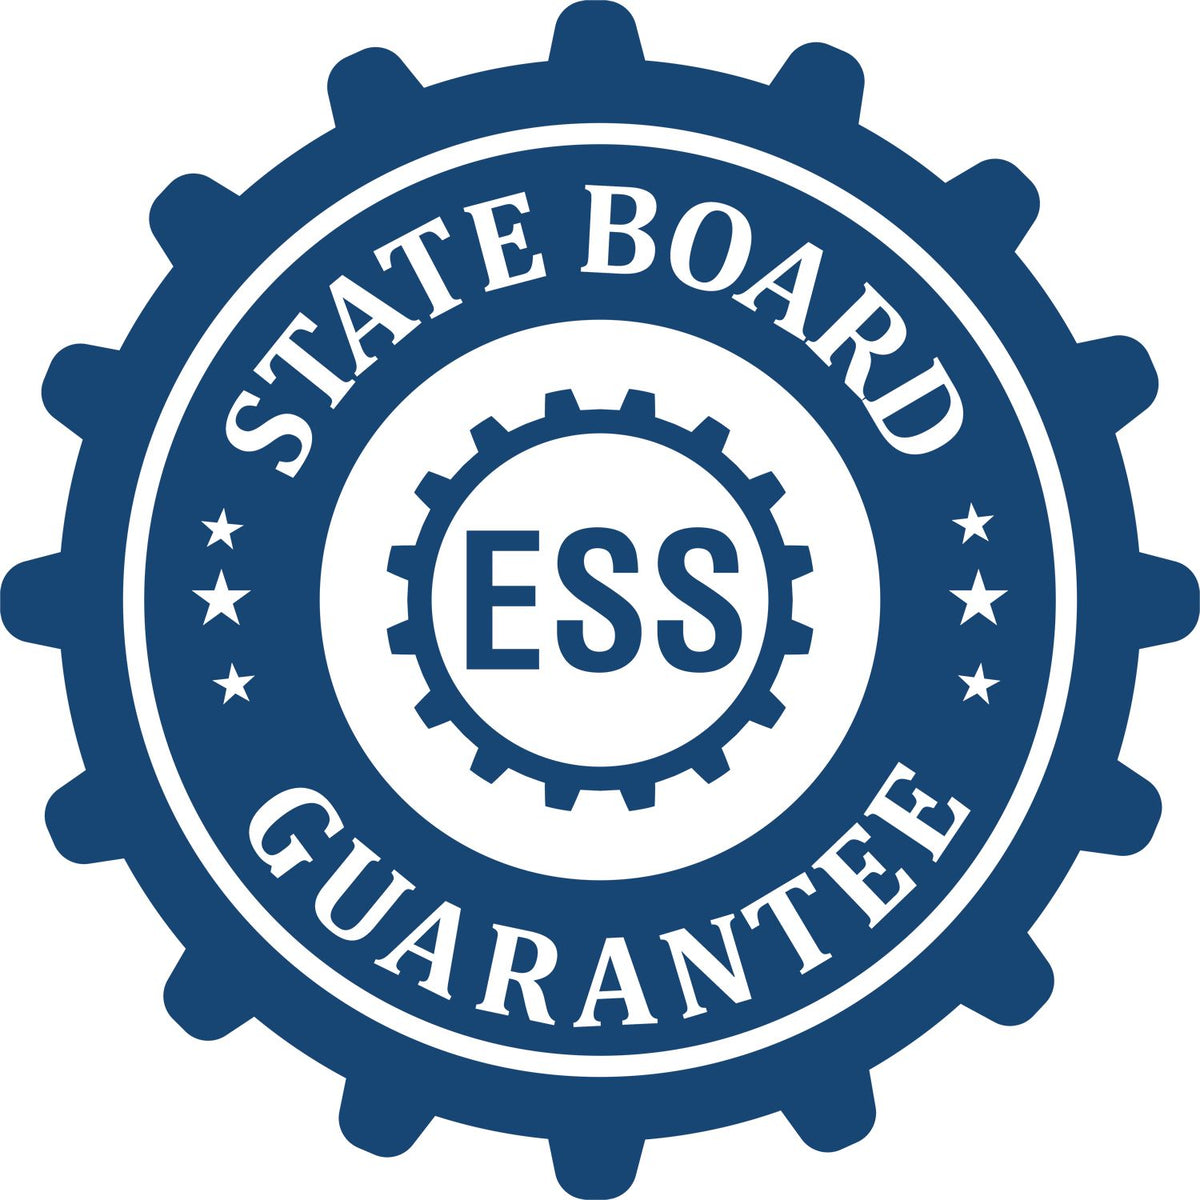 An emblem in a gear shape illustrating a state board guarantee for the Digital Mississippi PE Stamp and Electronic Seal for Mississippi Engineer product.